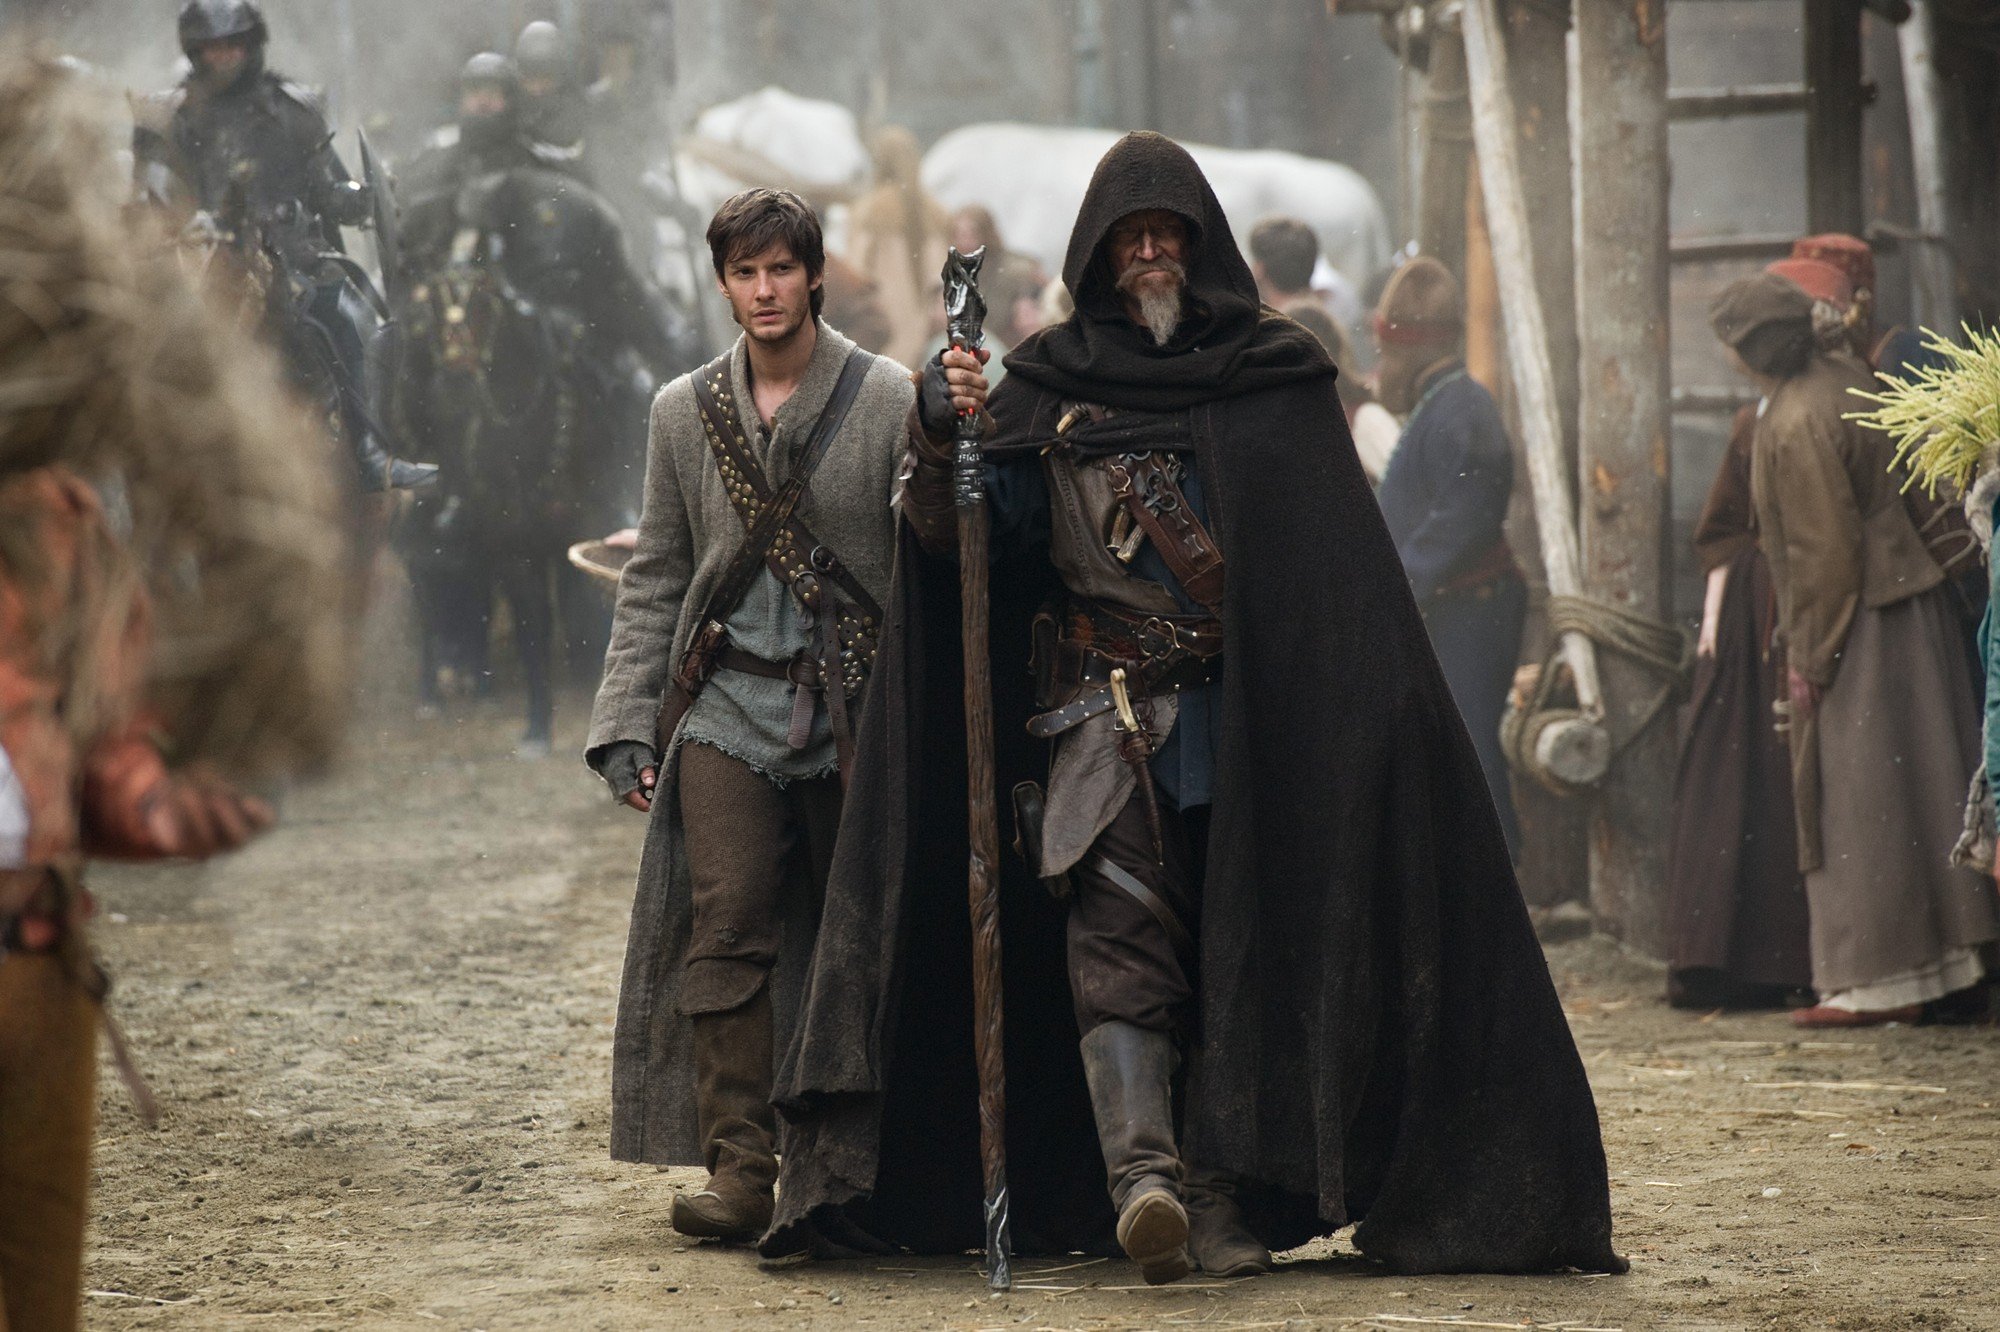 Ben Barnes stars as Tom Ward and Jeff Bridges stars as Master Gregory in Universal Pictures' Seventh Son (2015)